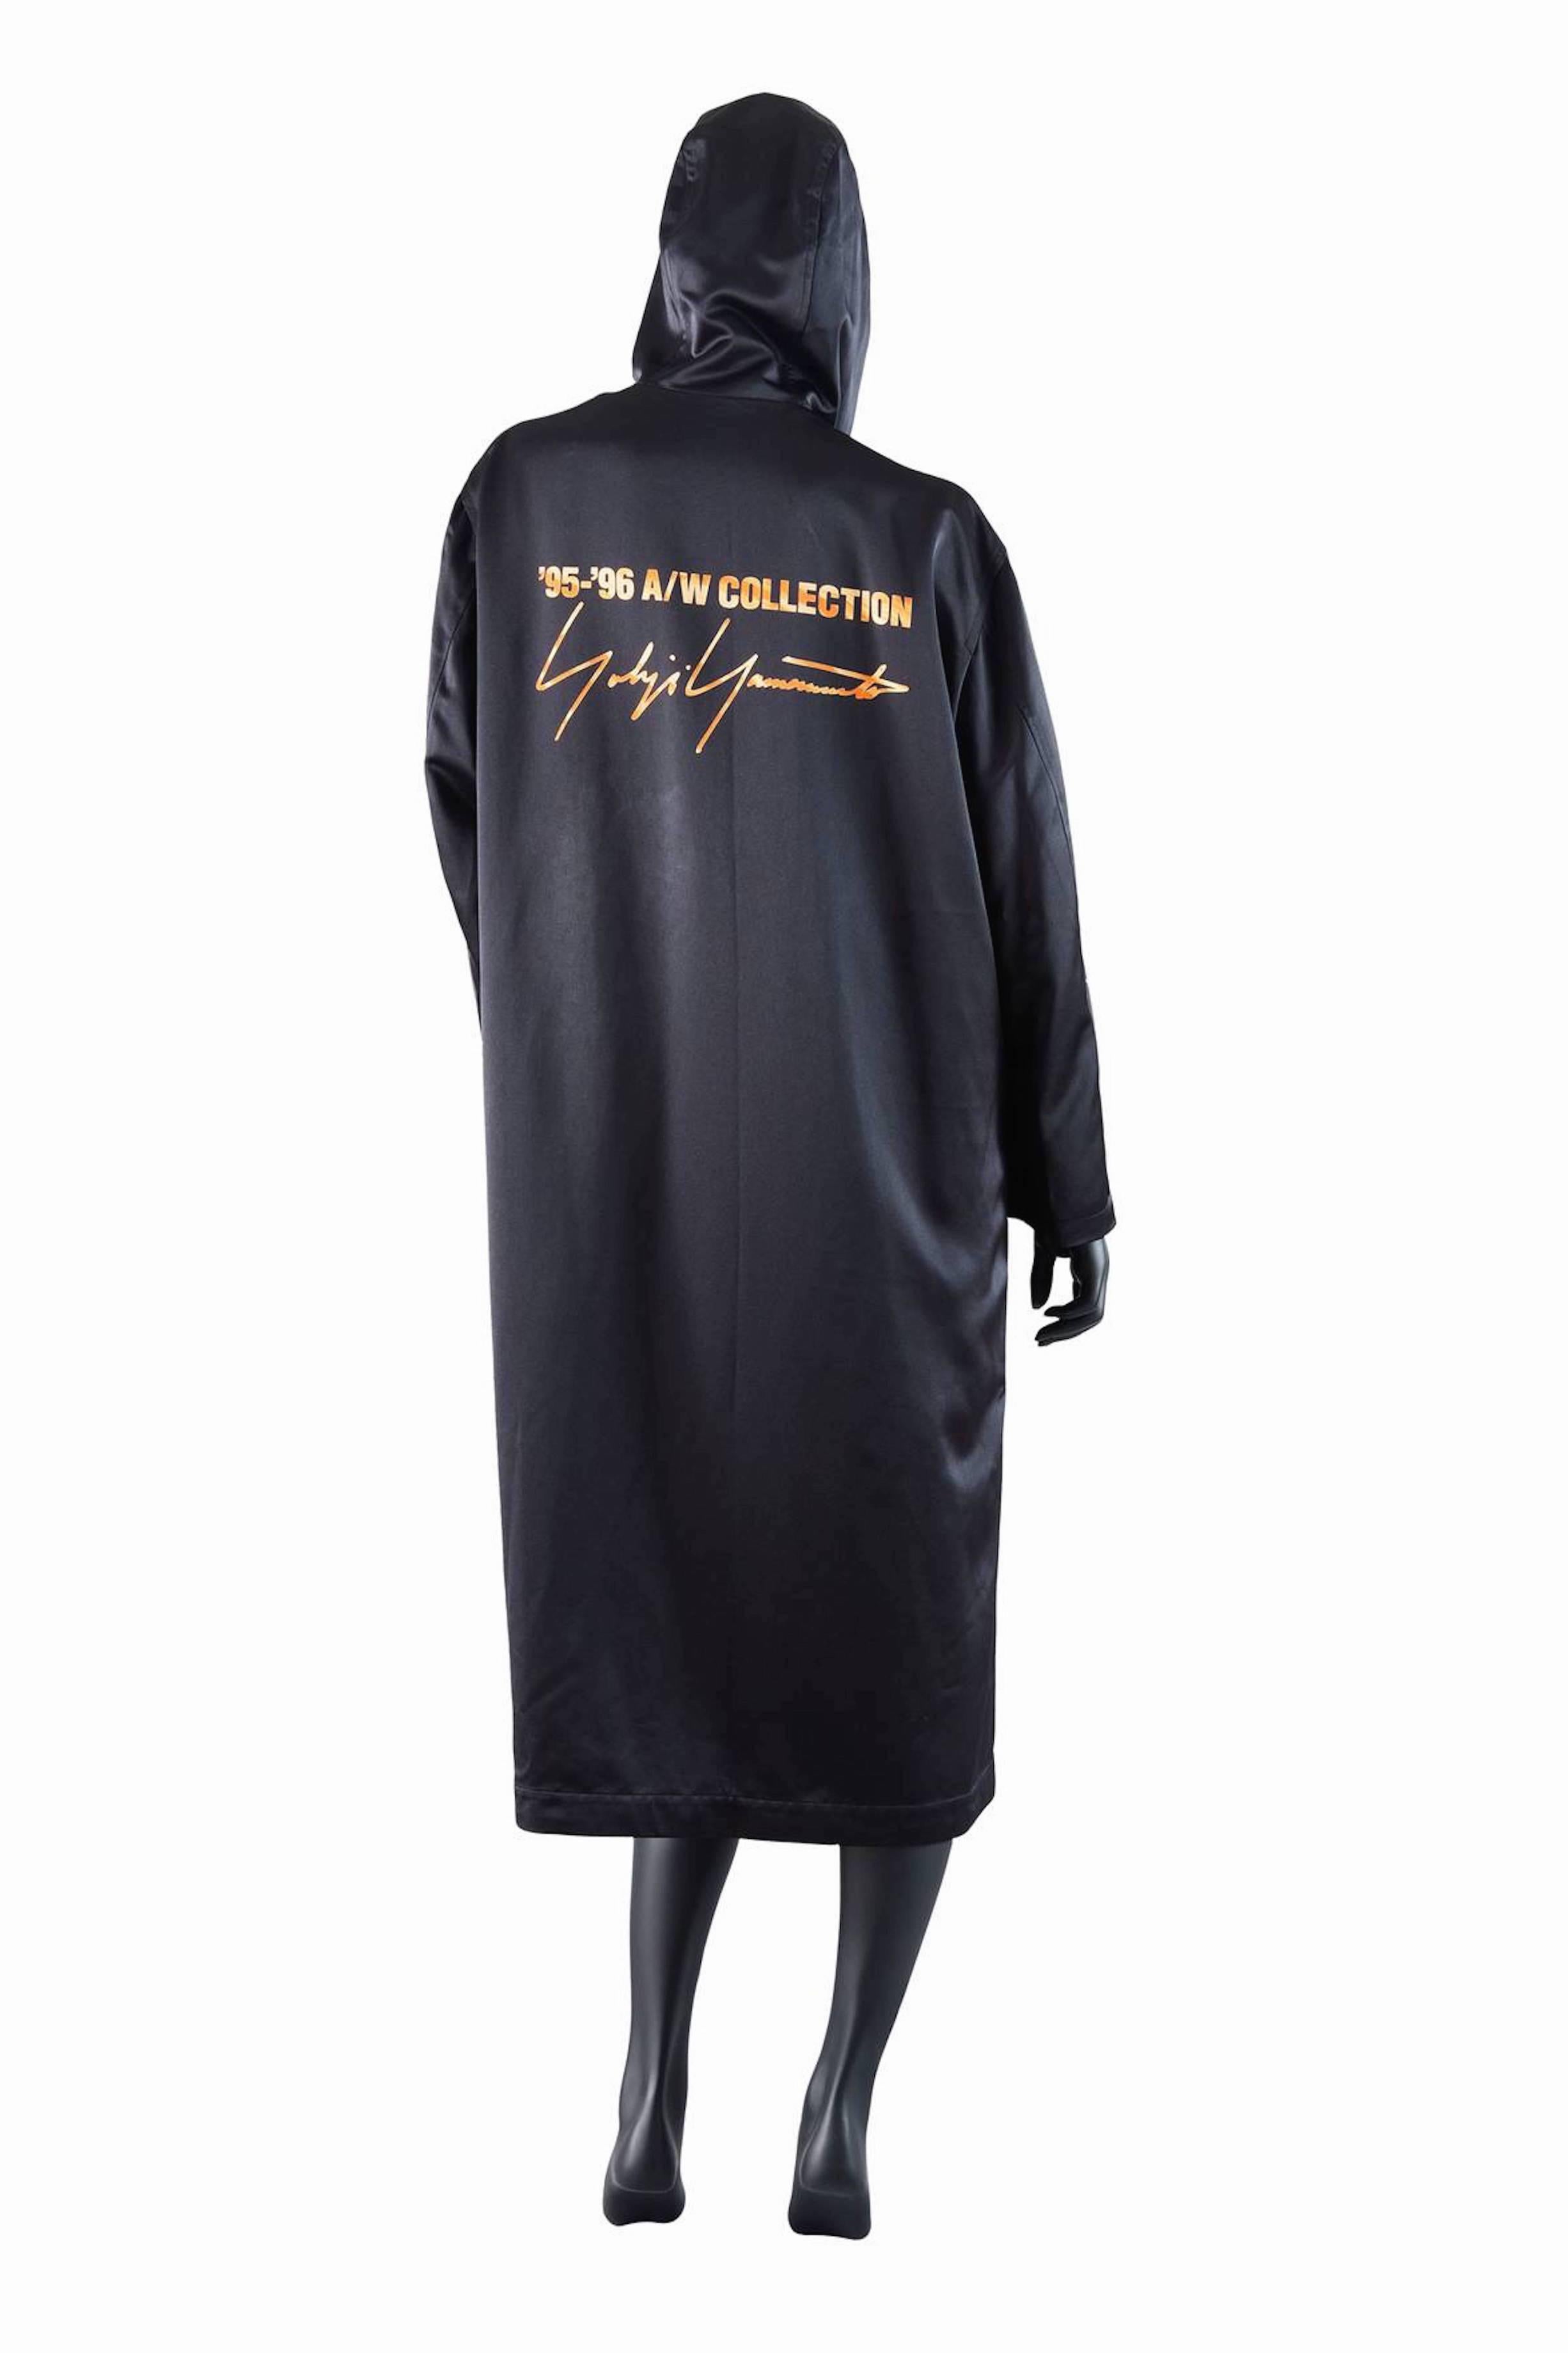 Fall / Winter 1994/95 Yohji Yamamoto Runway Staff Uniform Coat In Excellent Condition For Sale In London, GB